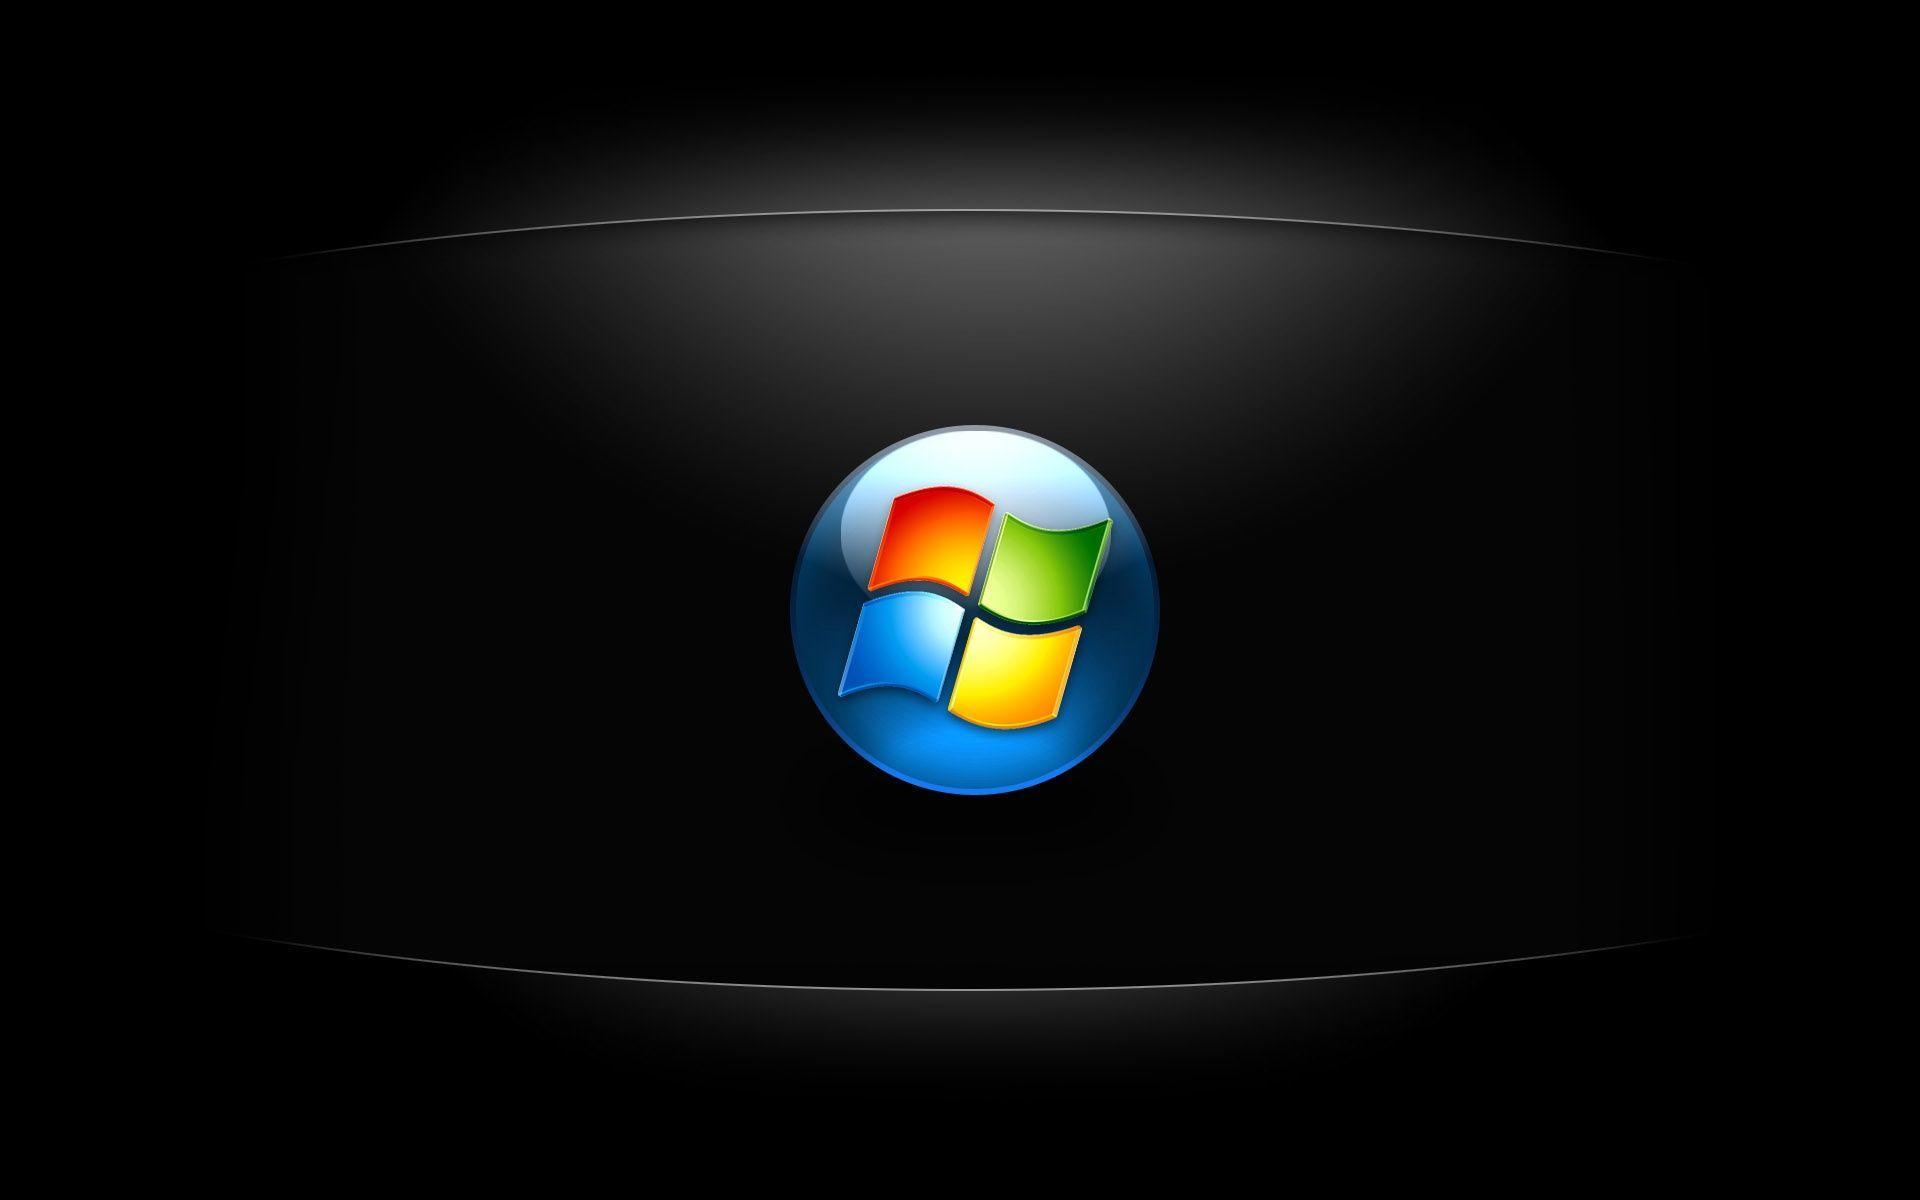 Windows 7 Hd Wallpaper 99. Collection Of Picture